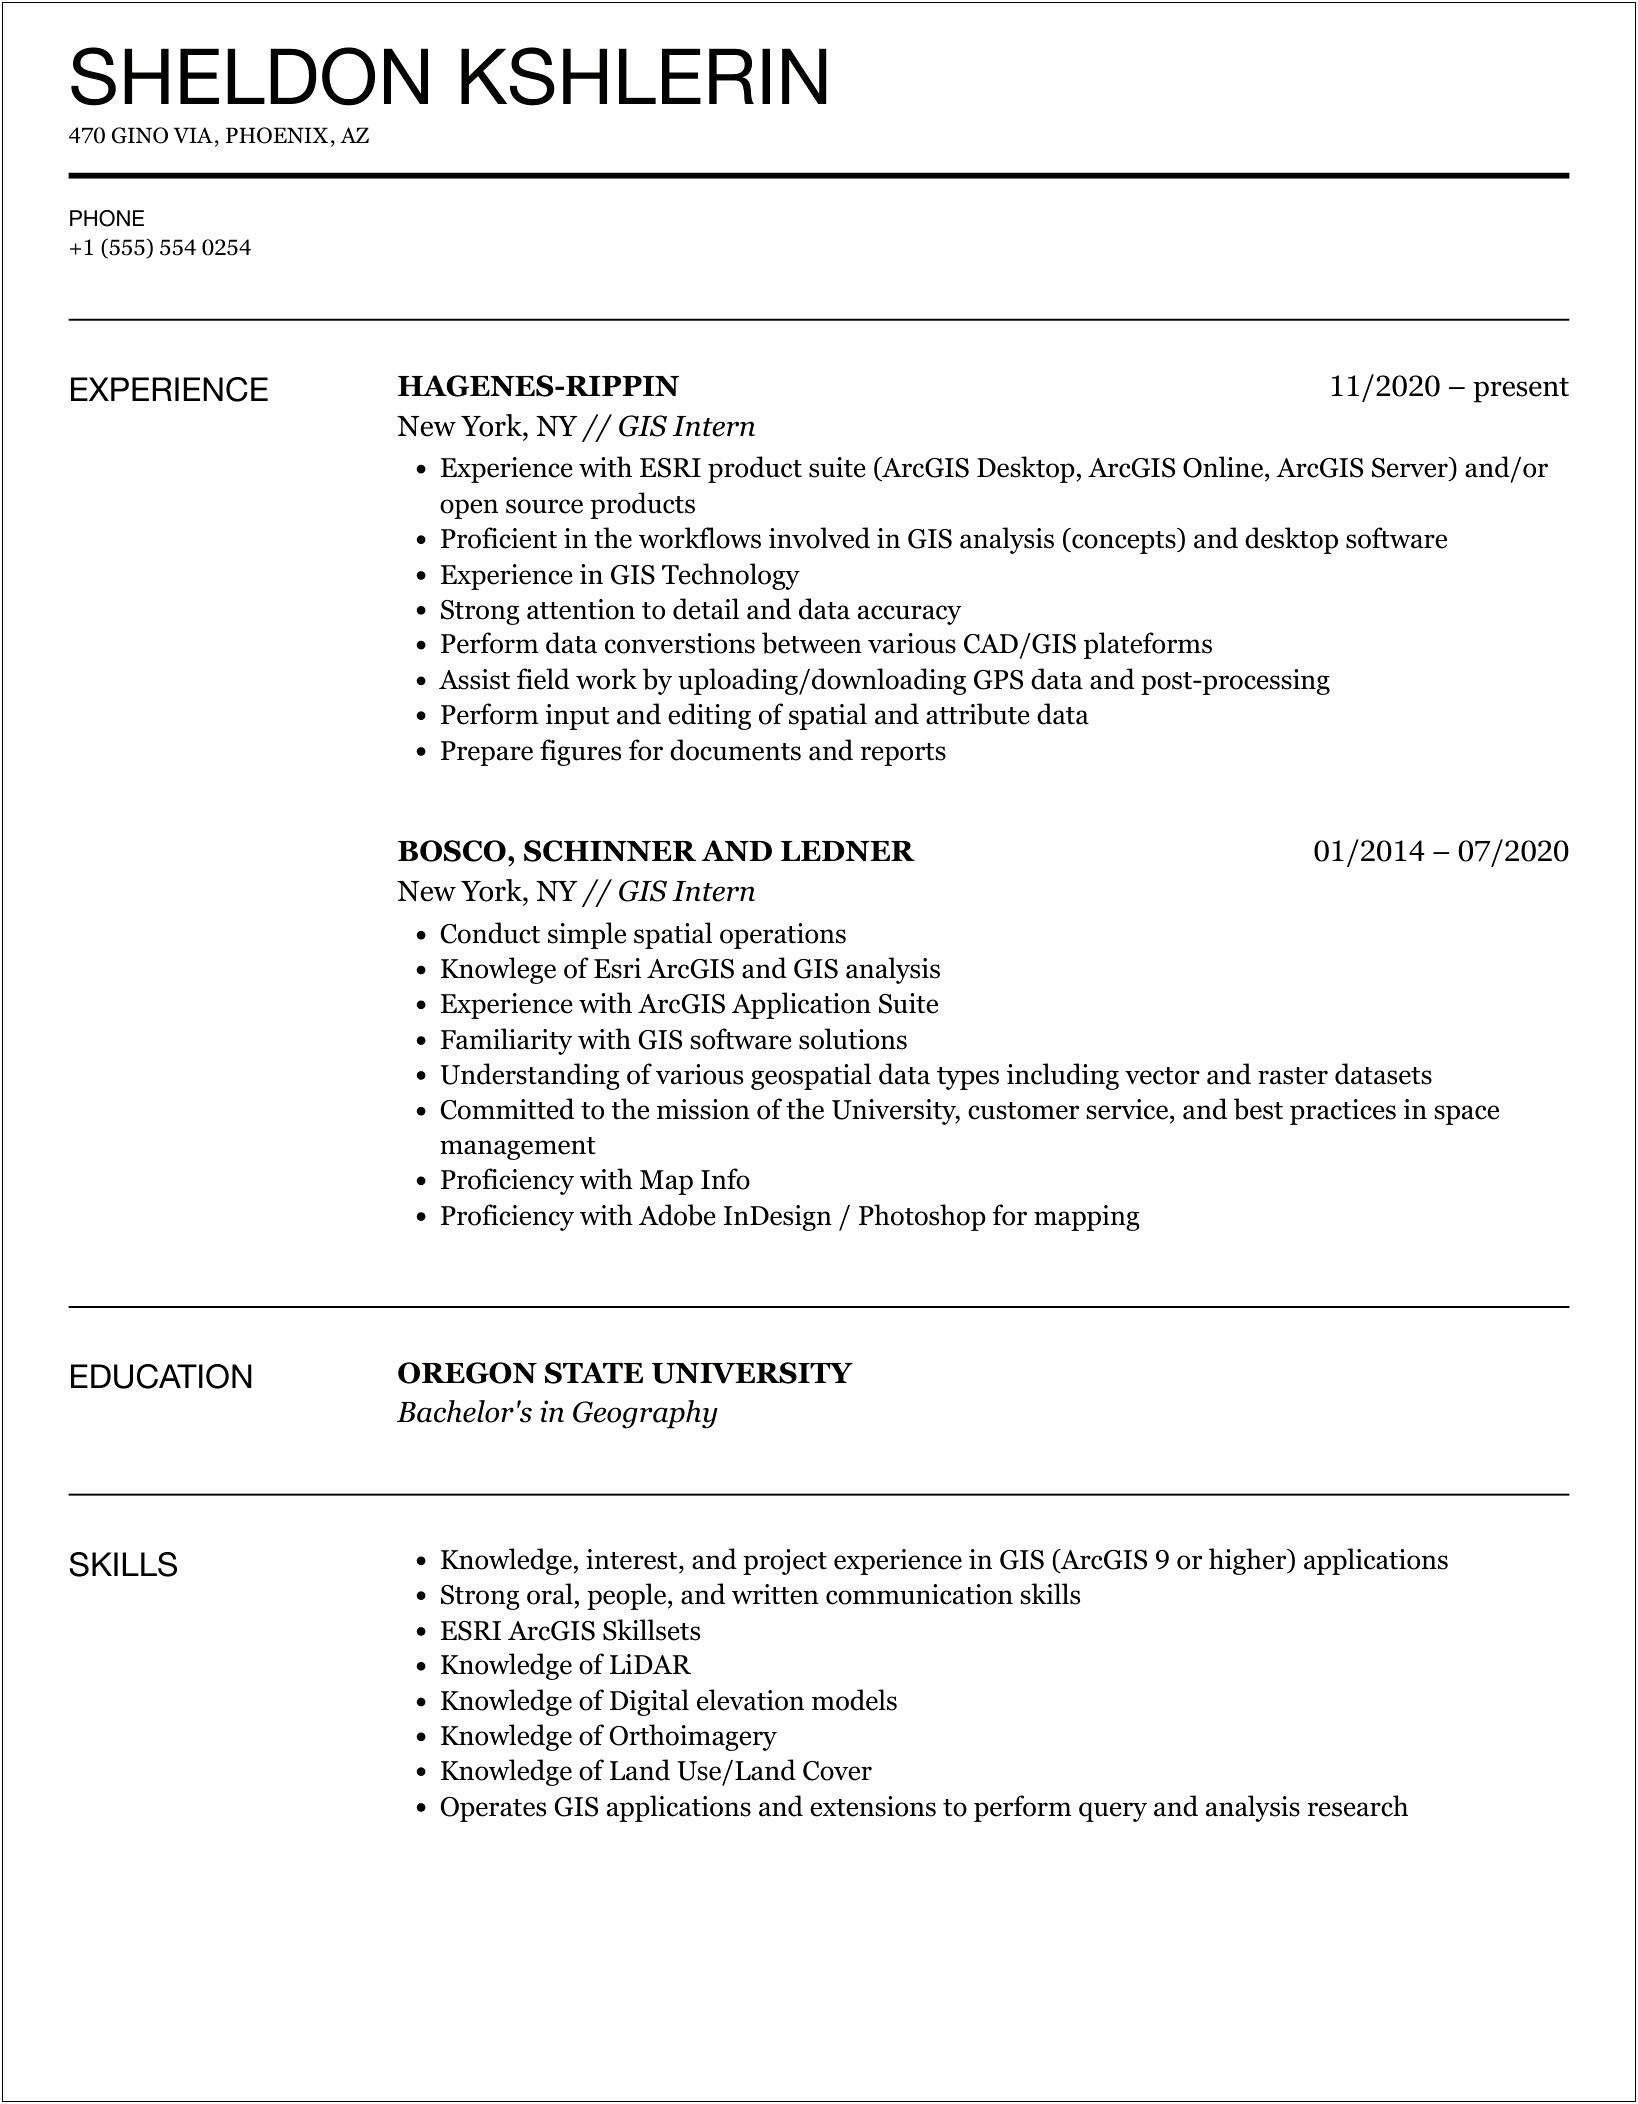 Example Resume For Geography Major And Gis Minor